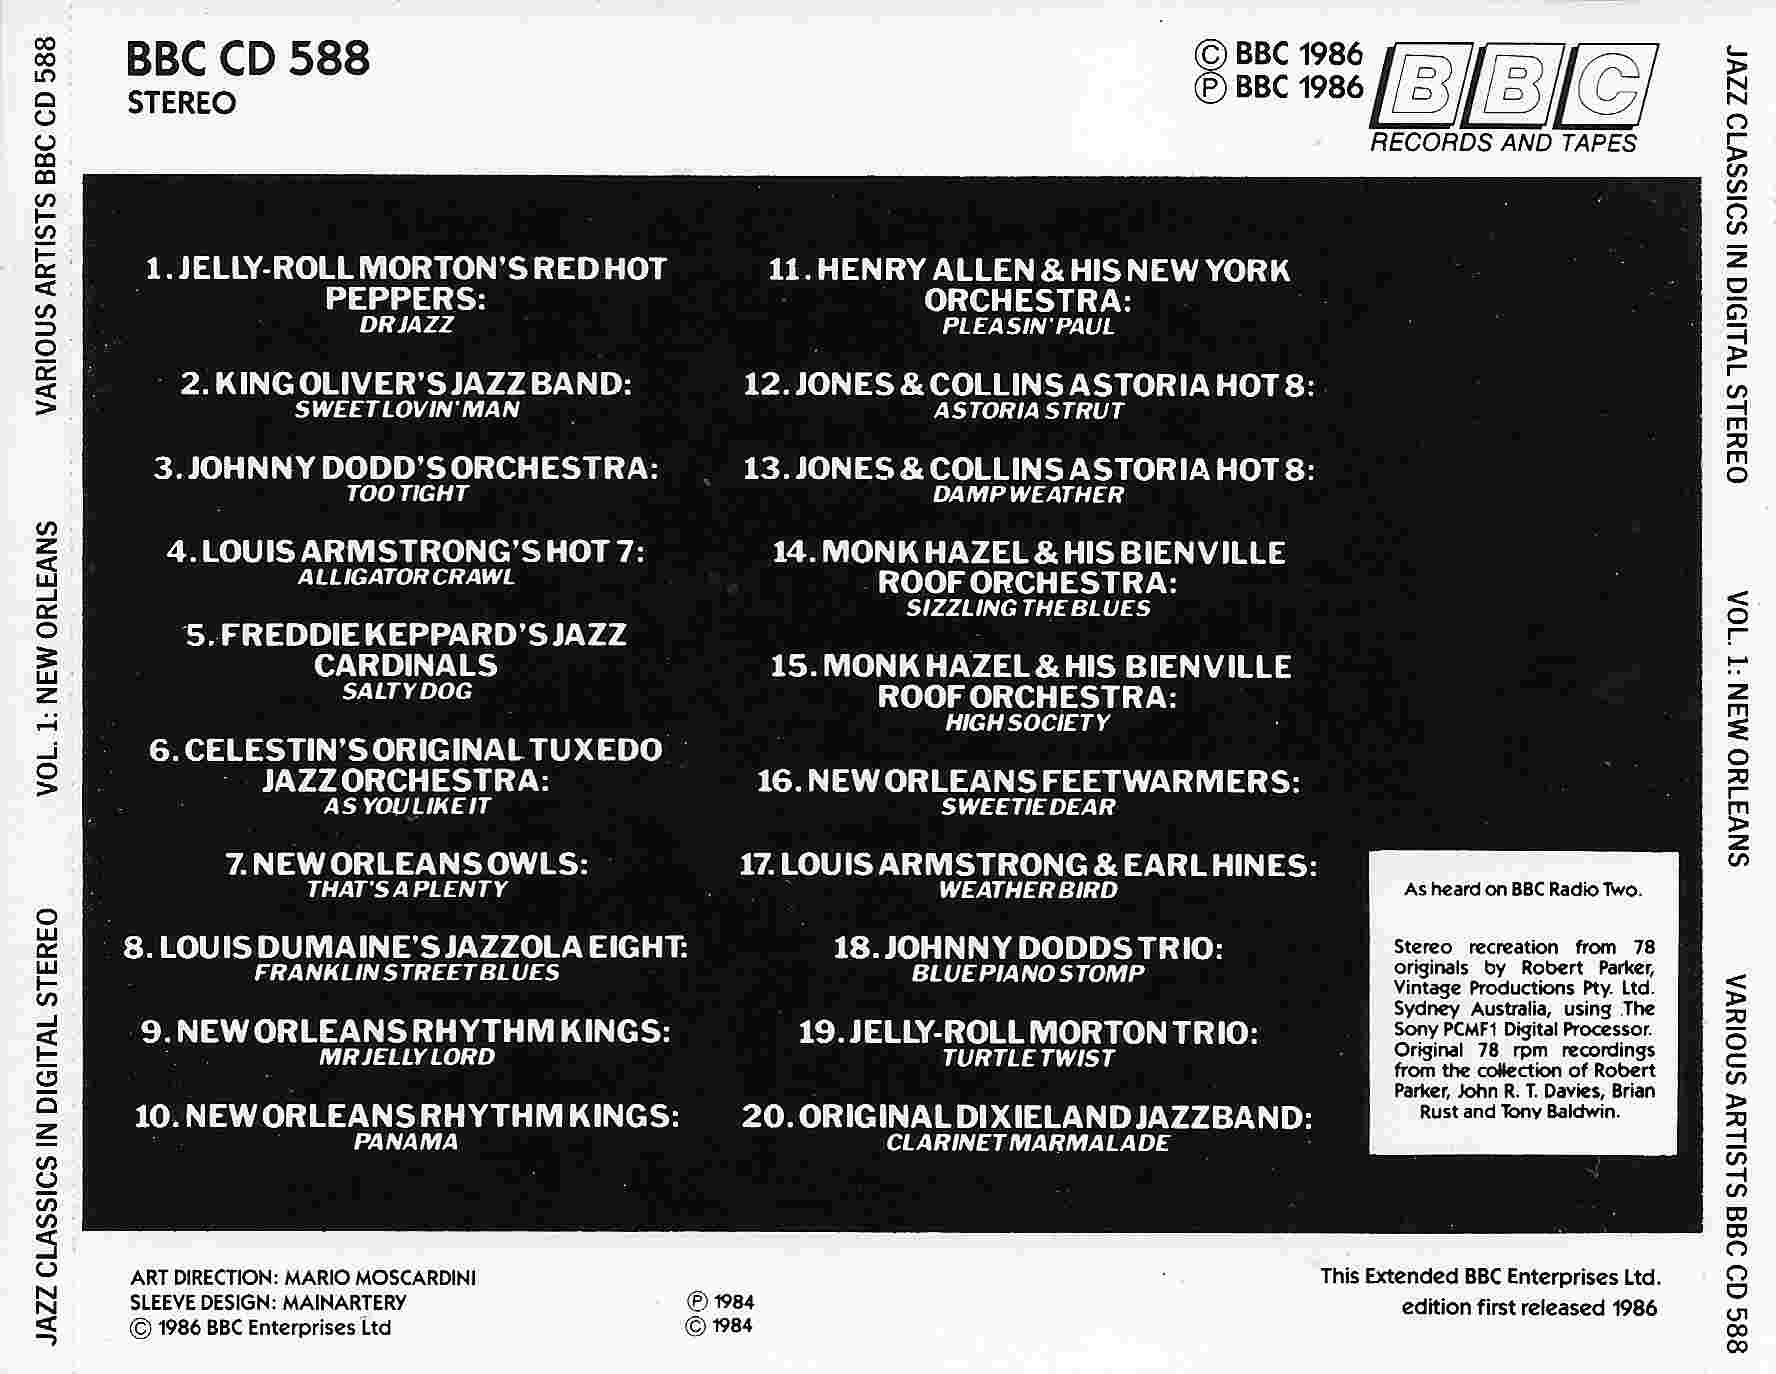 Back cover of BBCCD588